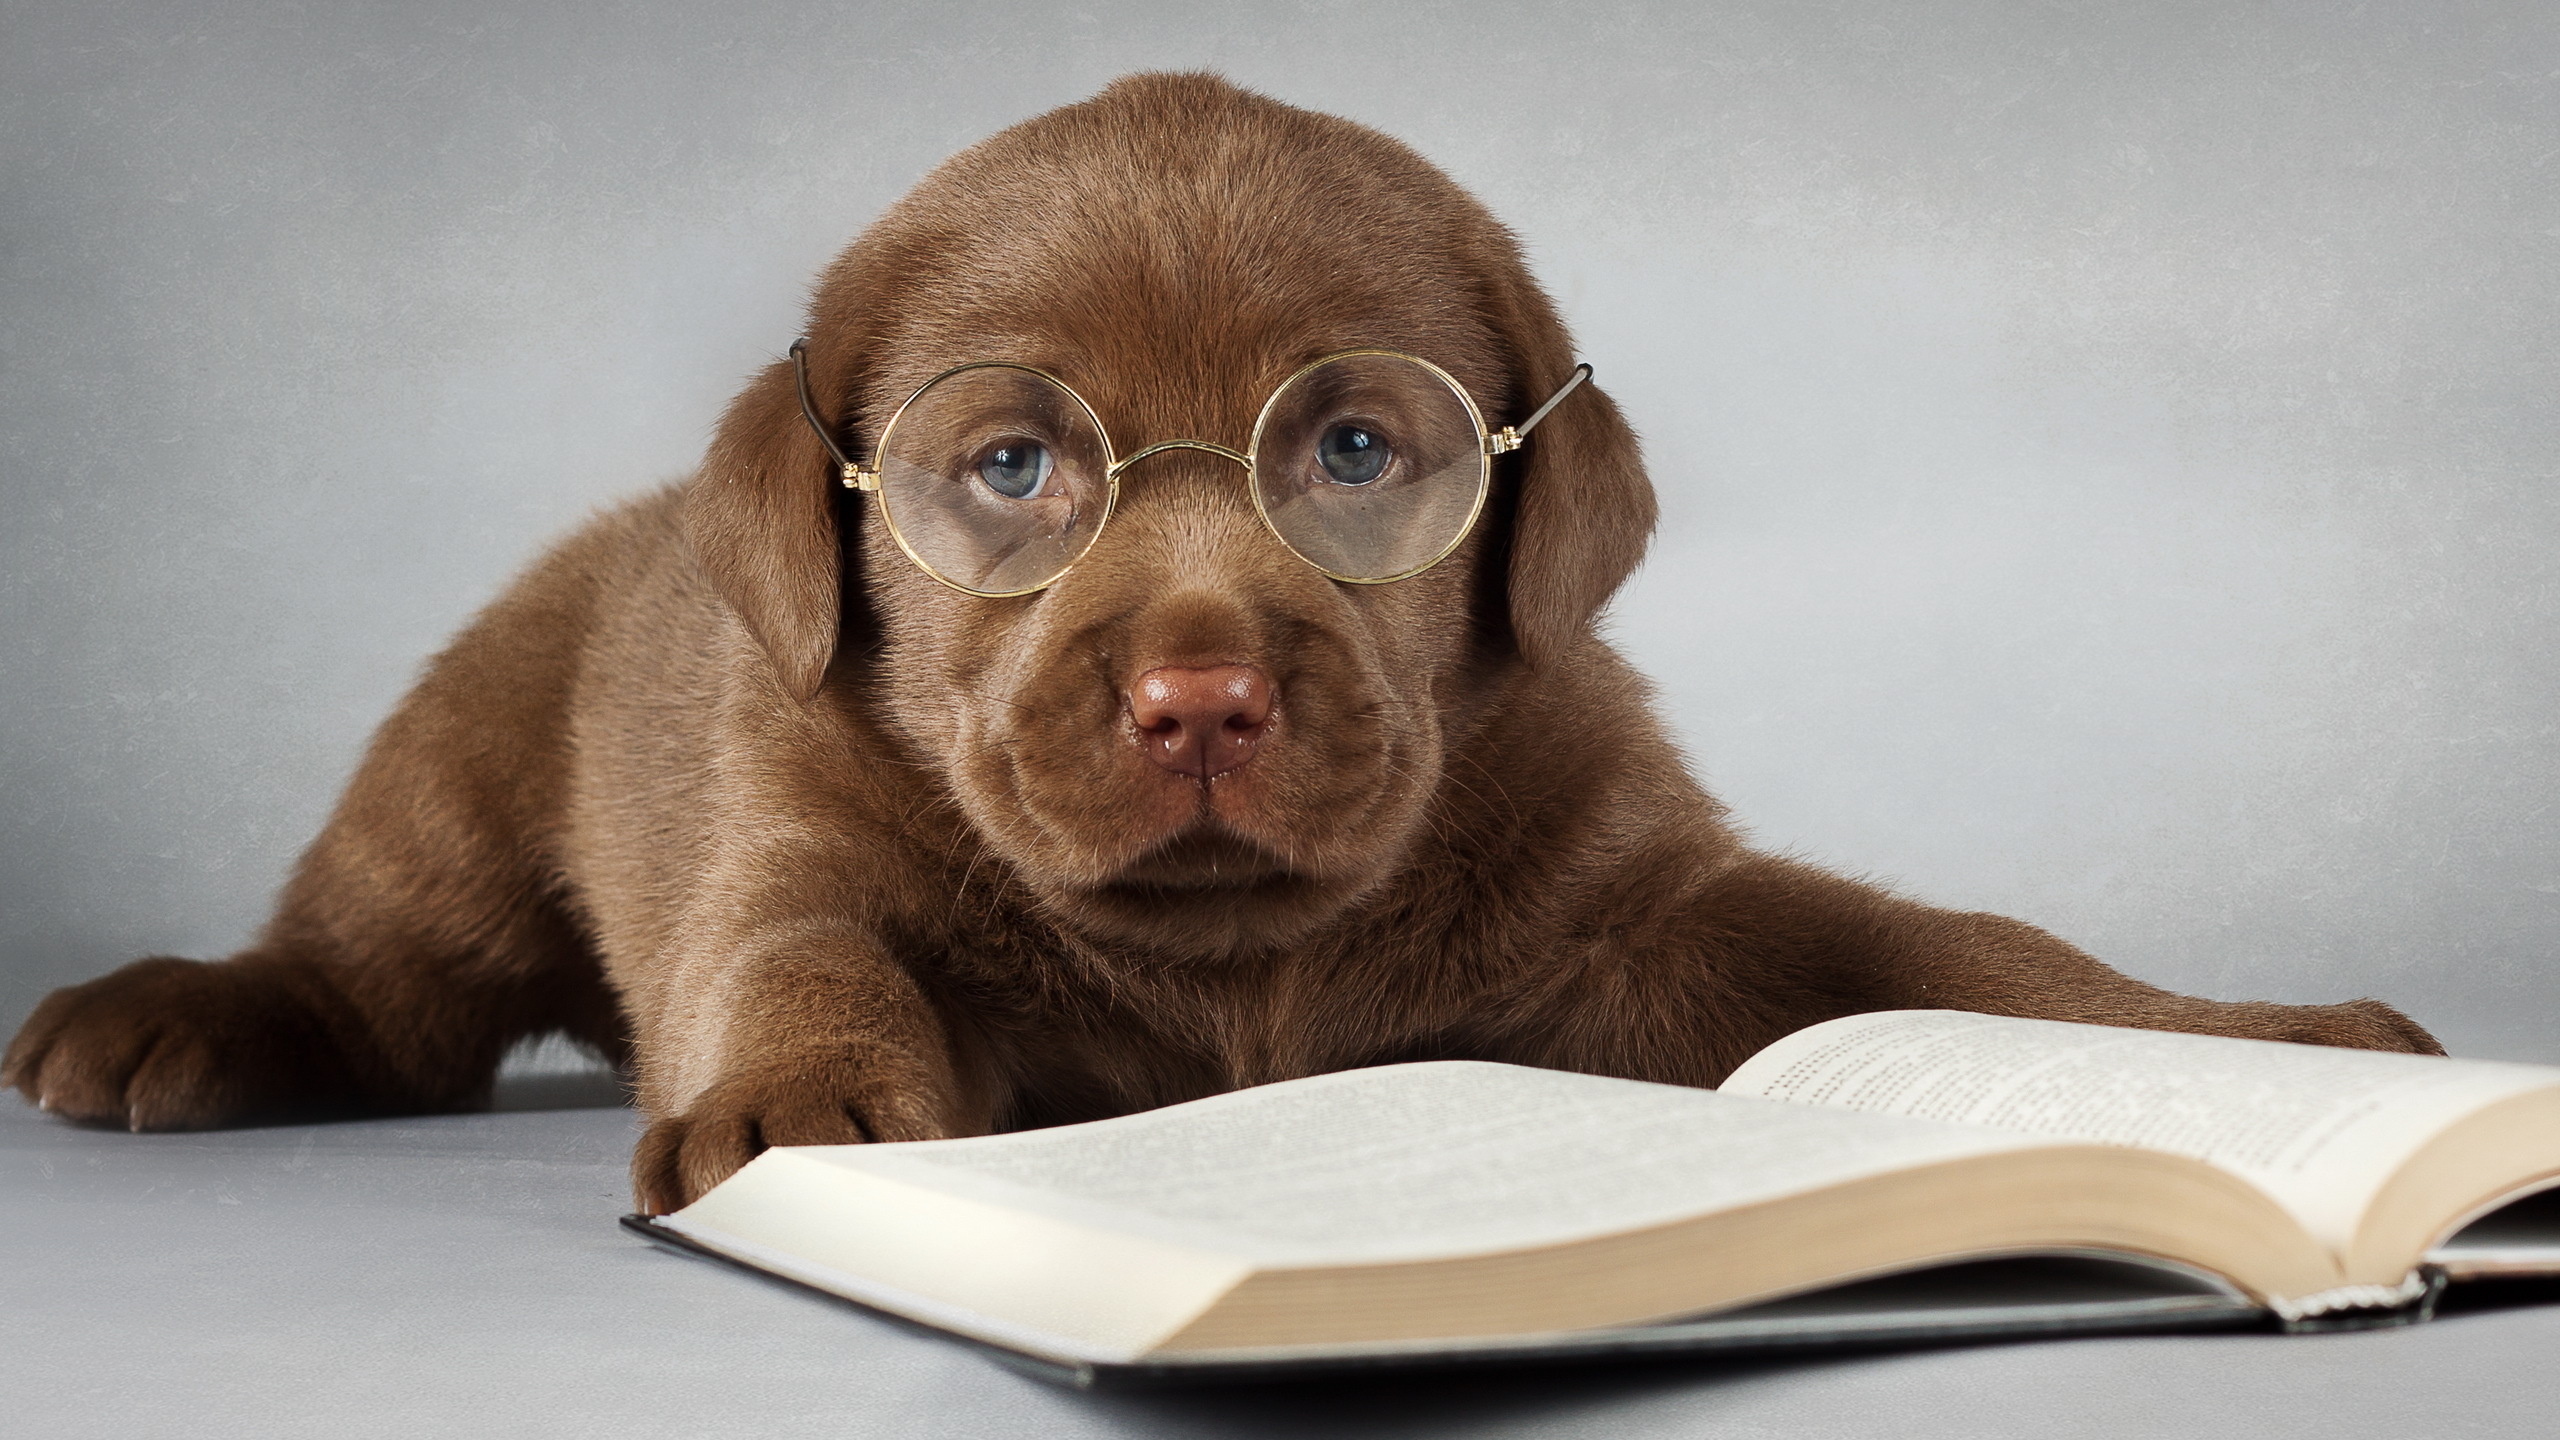 Dog With Glasses Wallpapers High Quality | Download Free